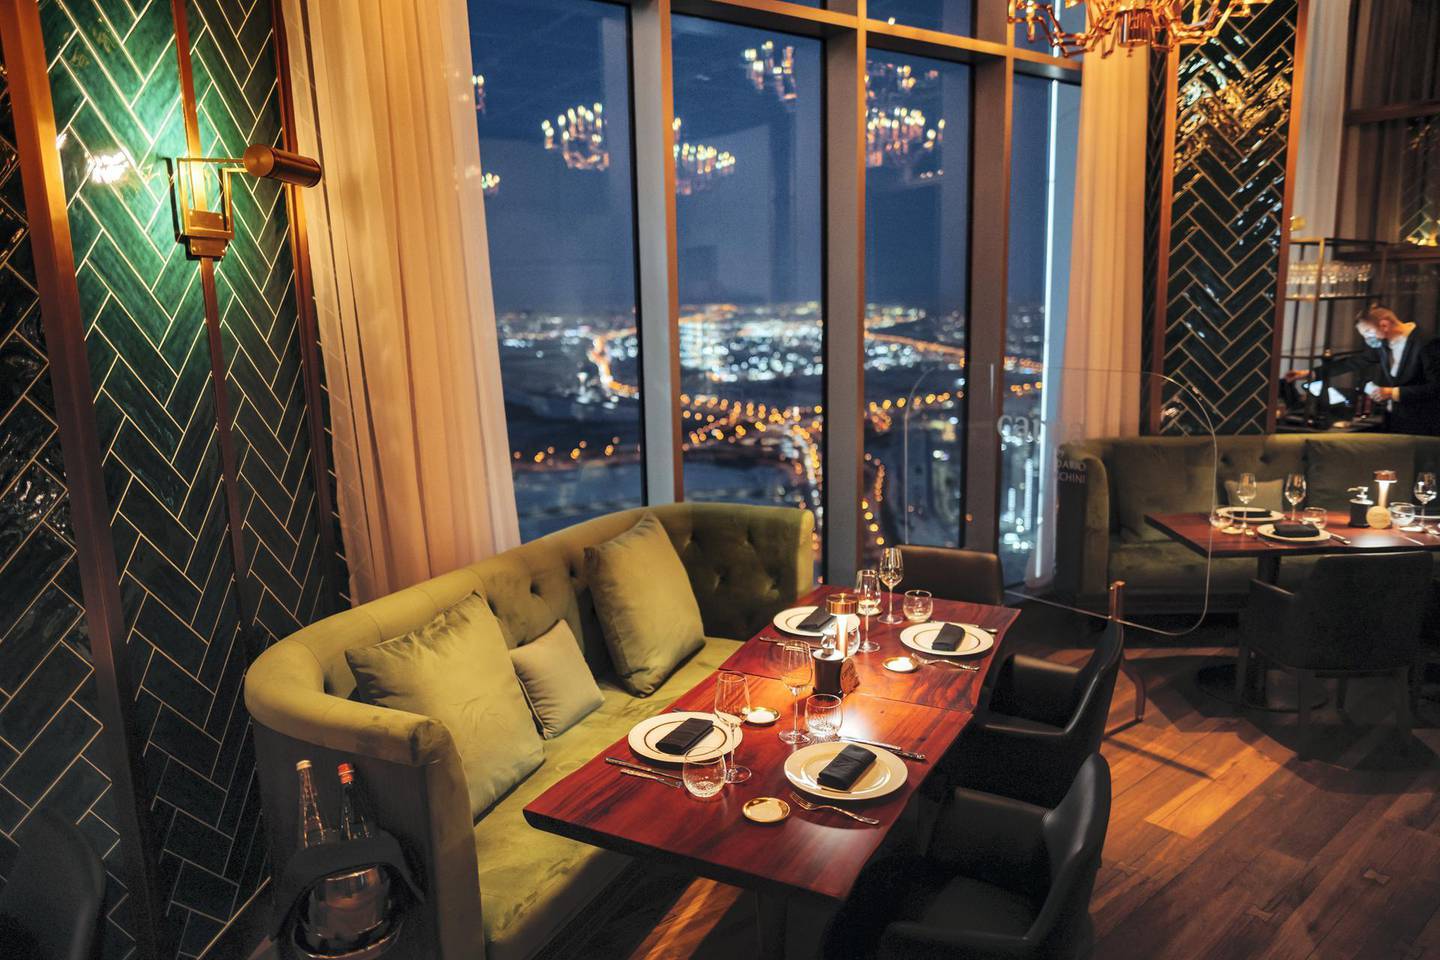 The restaurant is located on the 74th floor of the hotel. Courtesy Carna by Dario Cecchini